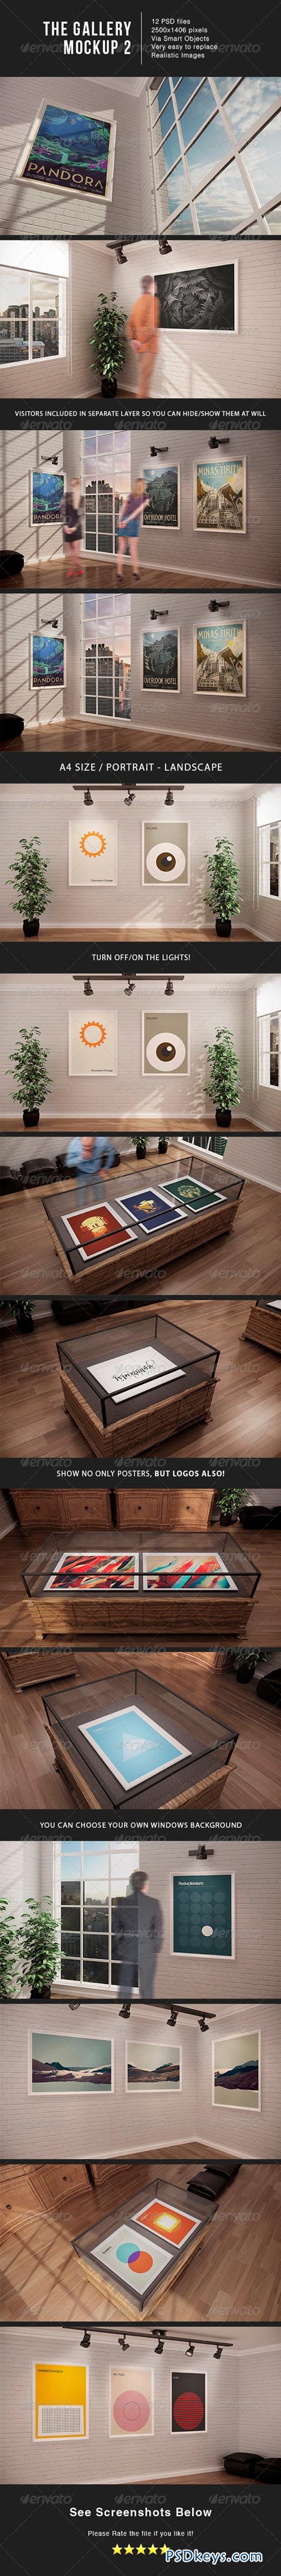 The Gallery MockUp 2 6538953